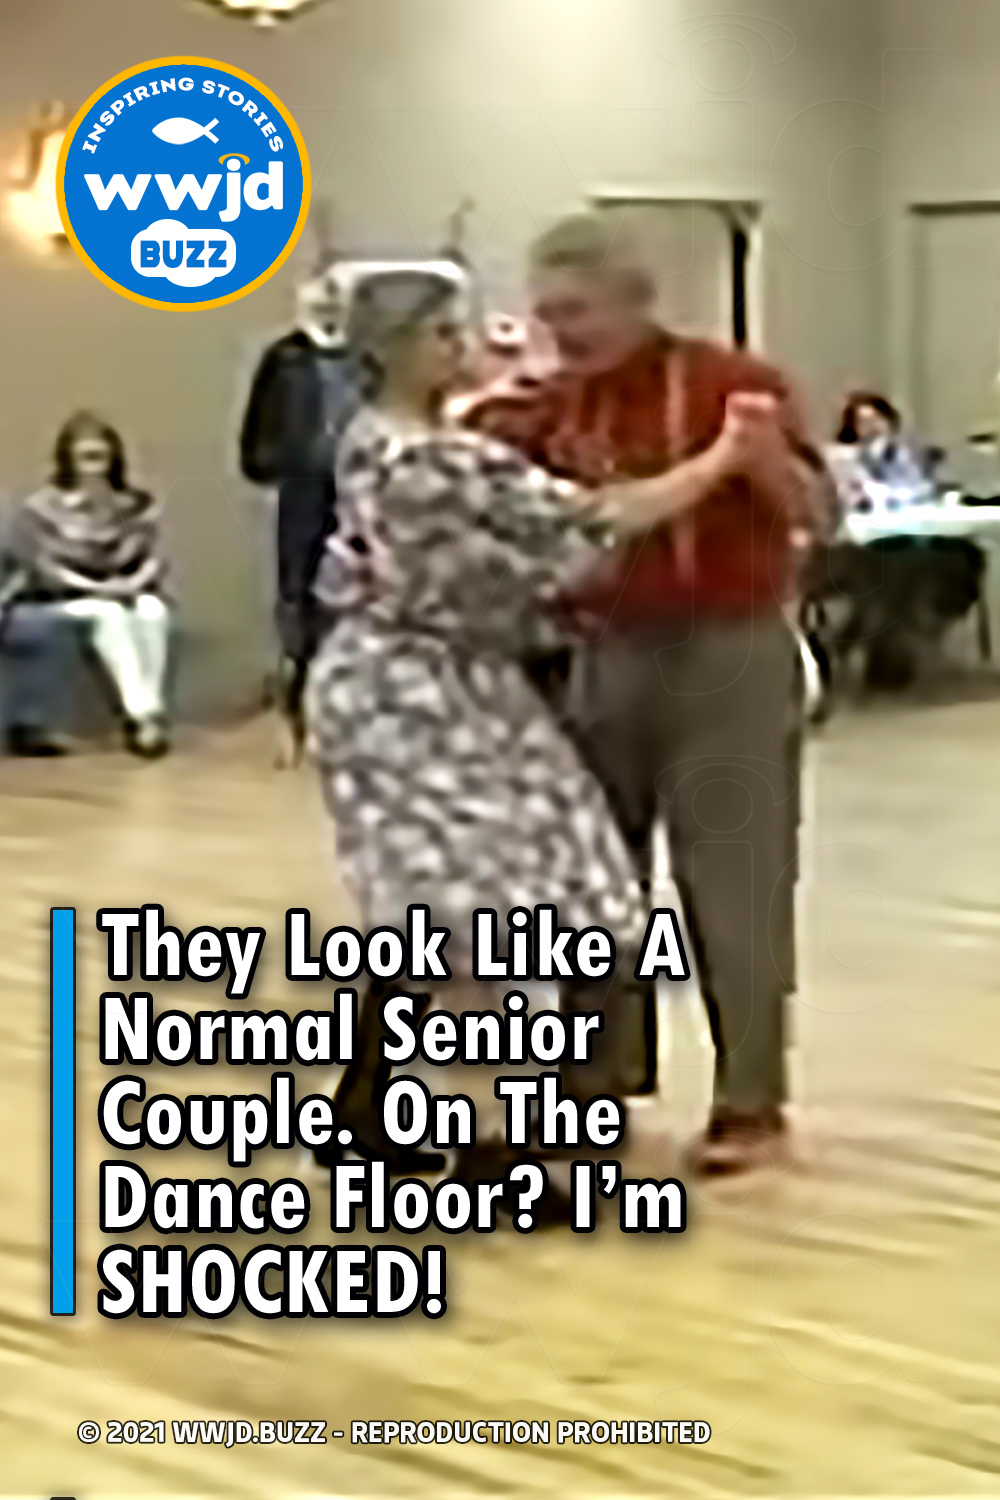 They Look Like A Normal Senior Couple. On The Dance Floor? I’m SHOCKED!